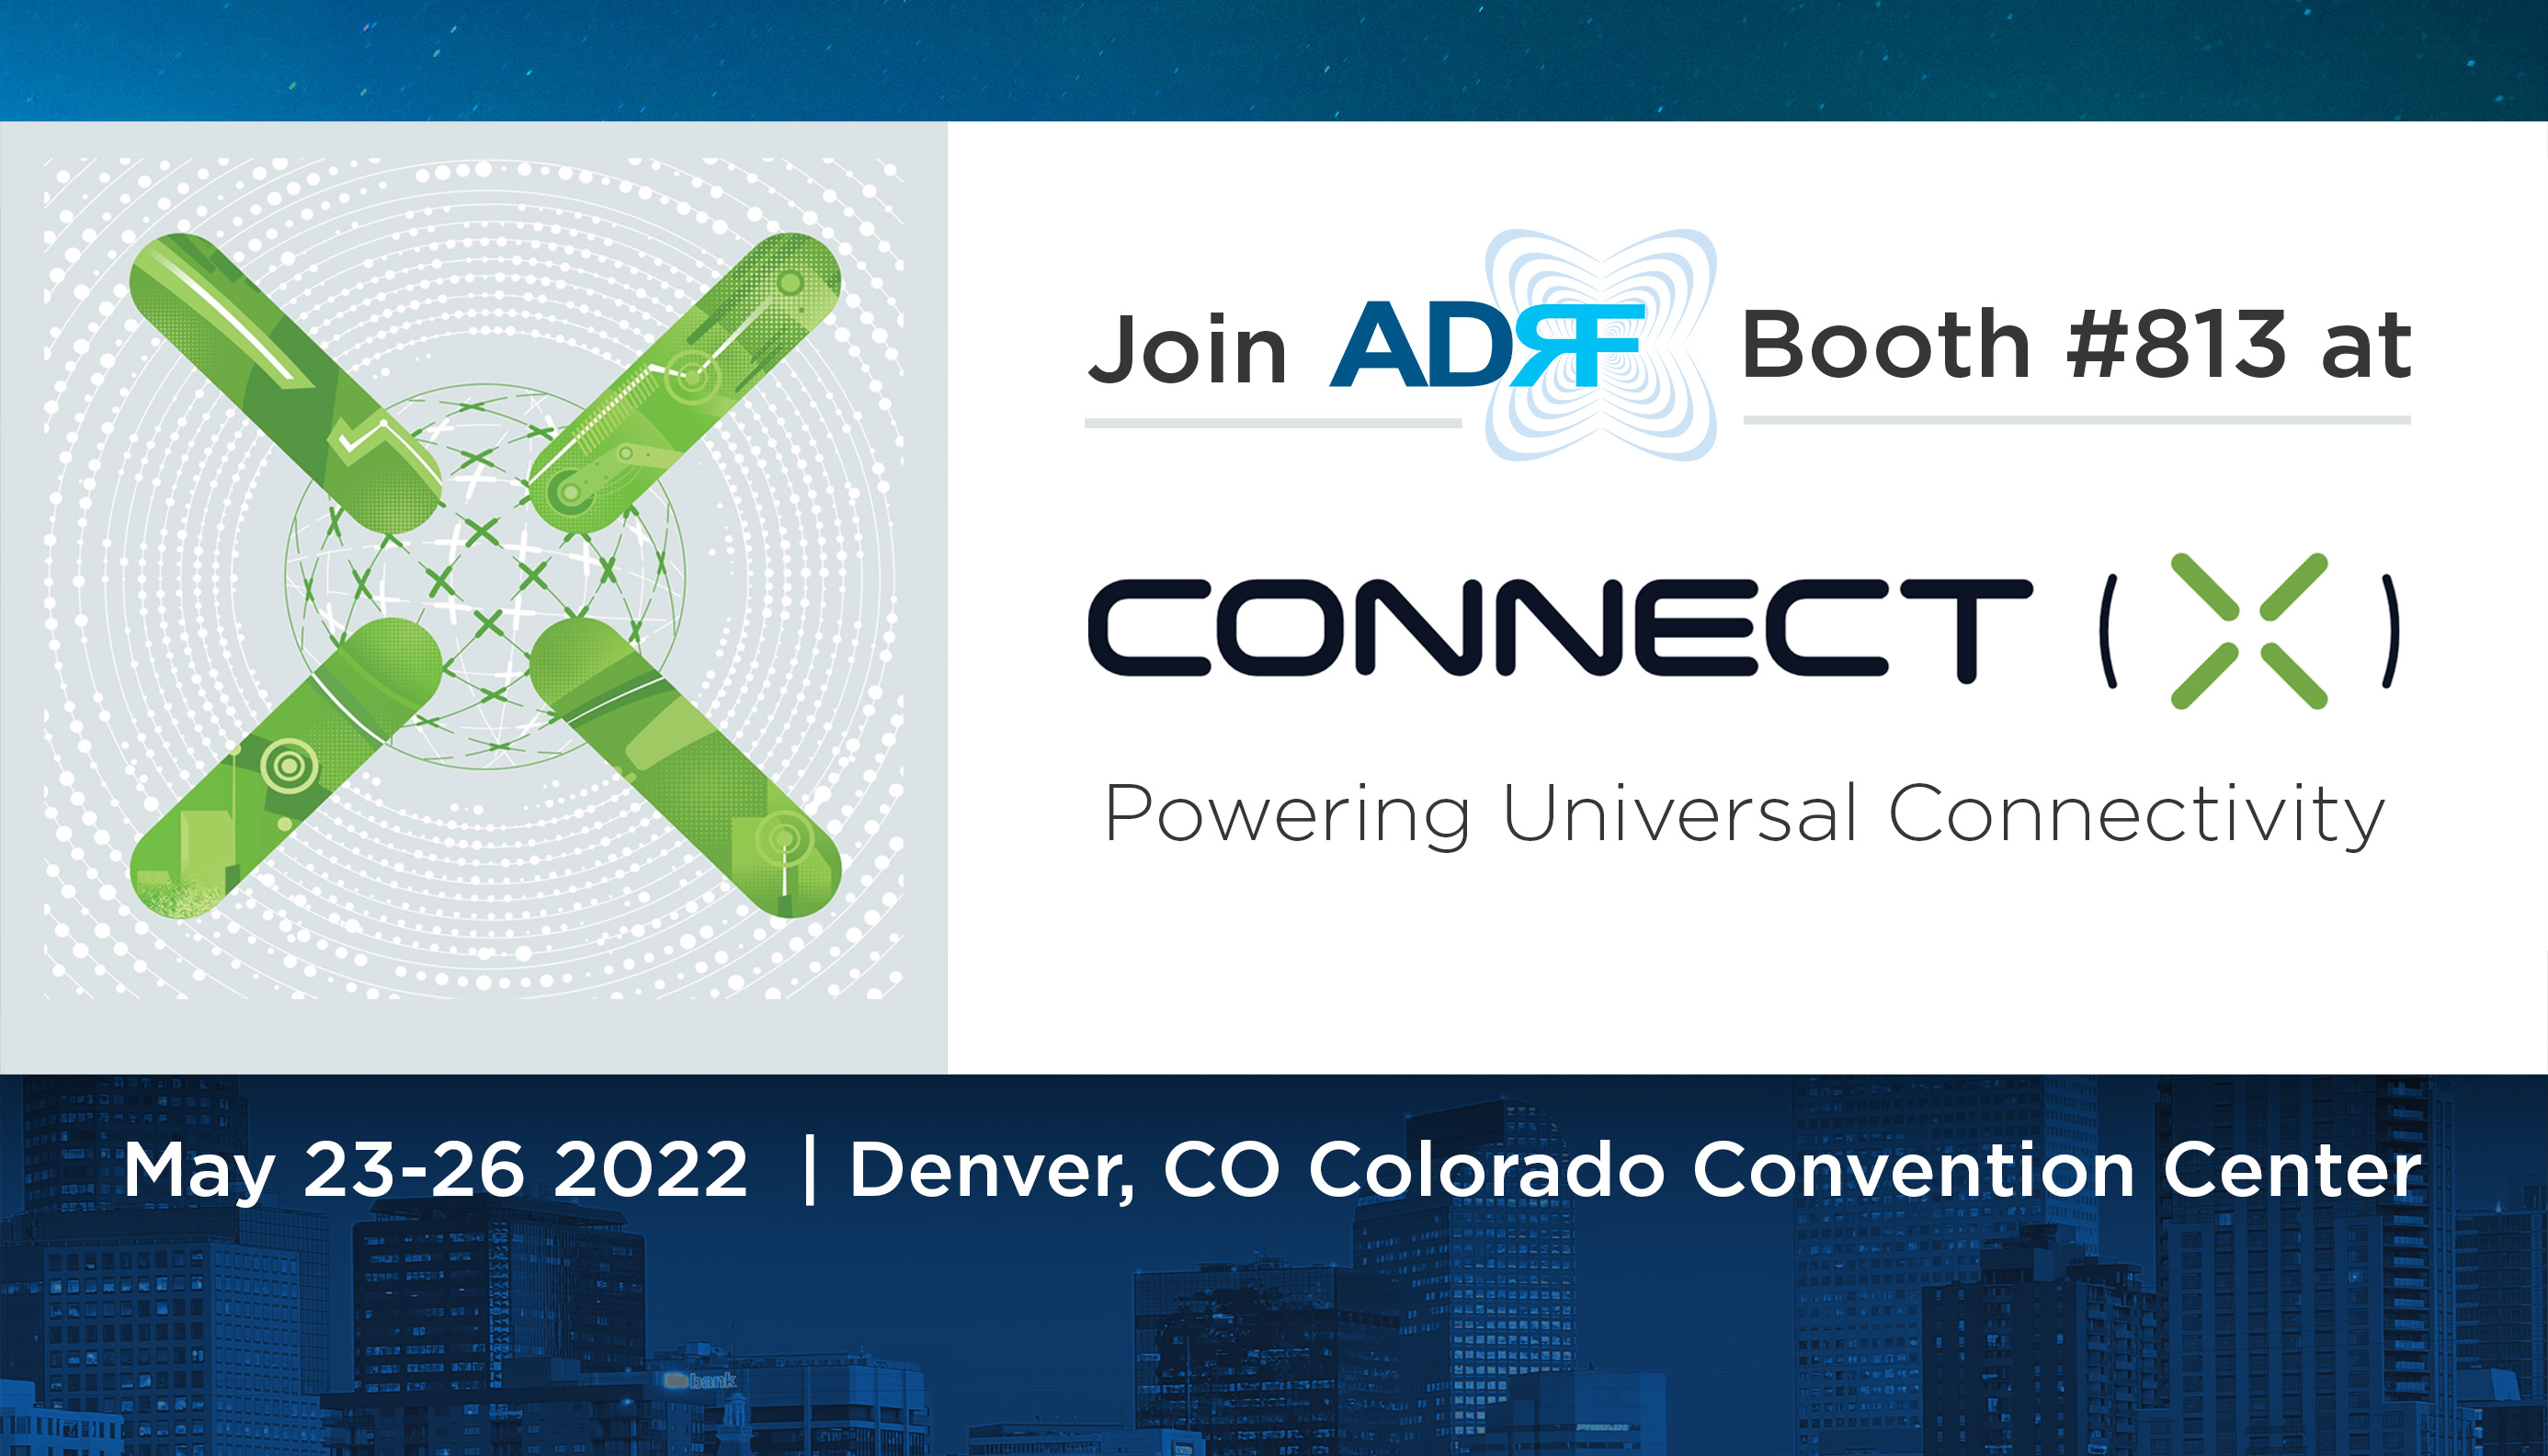 Come see us at Connect (X) 2022!